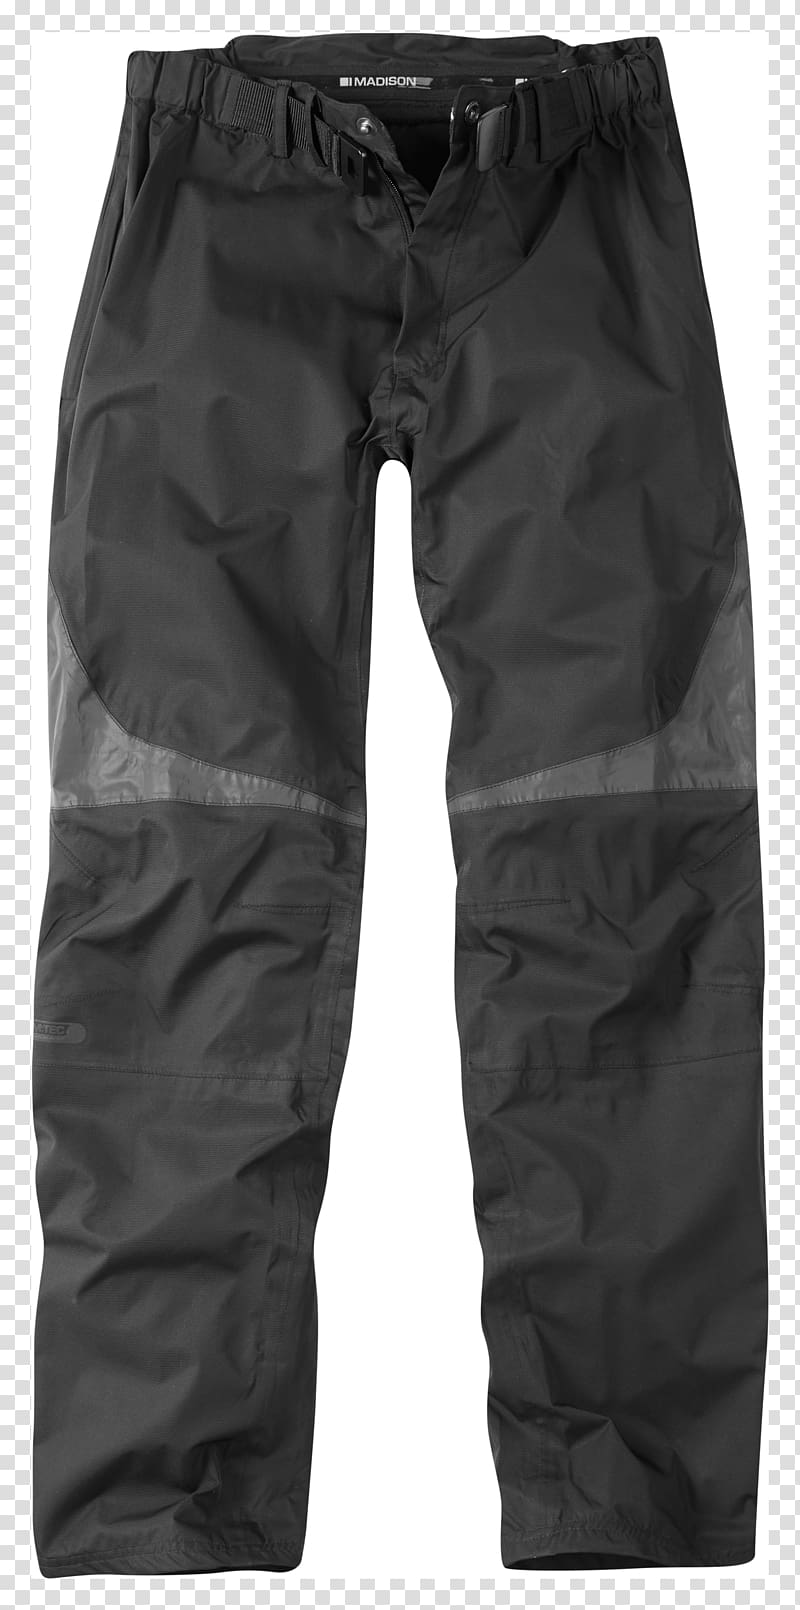 Pants Carhartt Clothing Dungaree Workwear, trousers transparent background PNG clipart